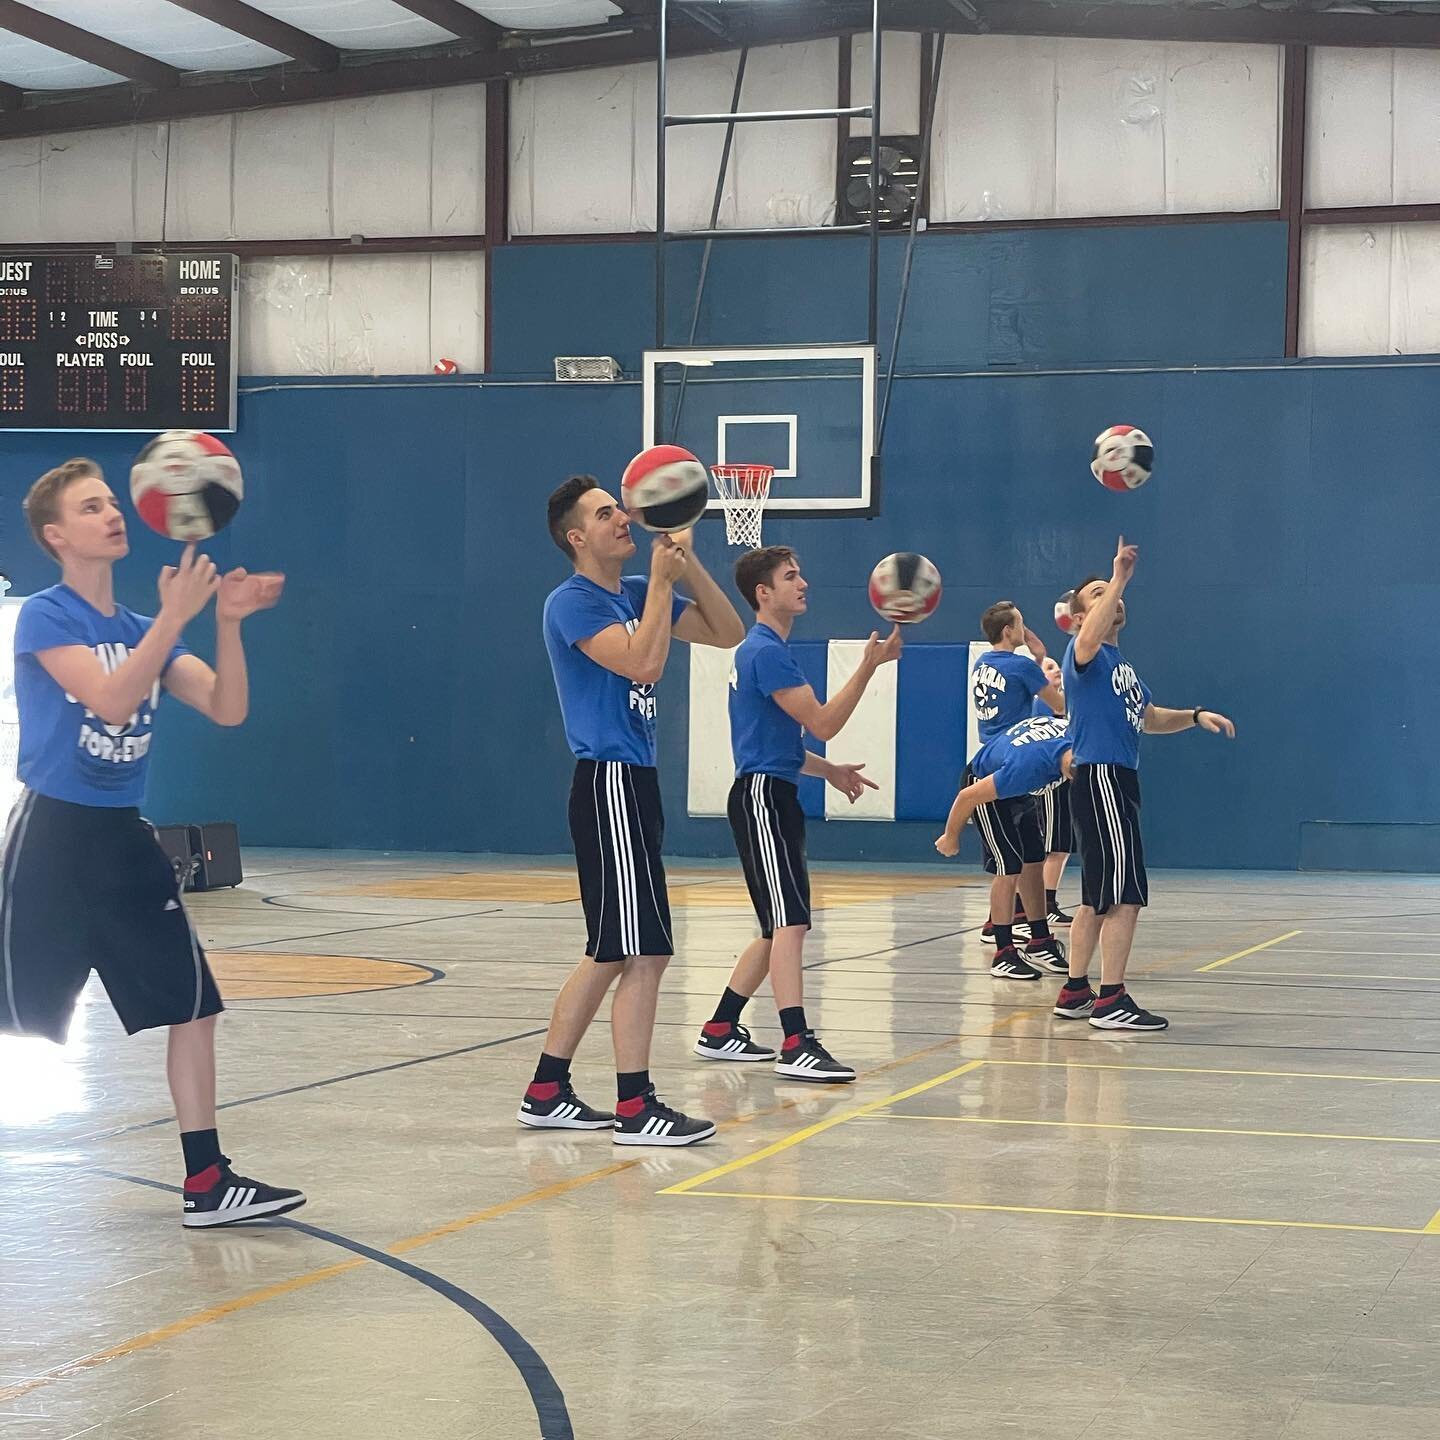 Last week,Leverage Ministries hosted Bruce Crevier and his family(@championsforever) for several Spin-Tacular Basketball Shows at several schools and the runaway shelter. The Crevier family is a 5x world record holder and were finalists on &ldquo;Ame